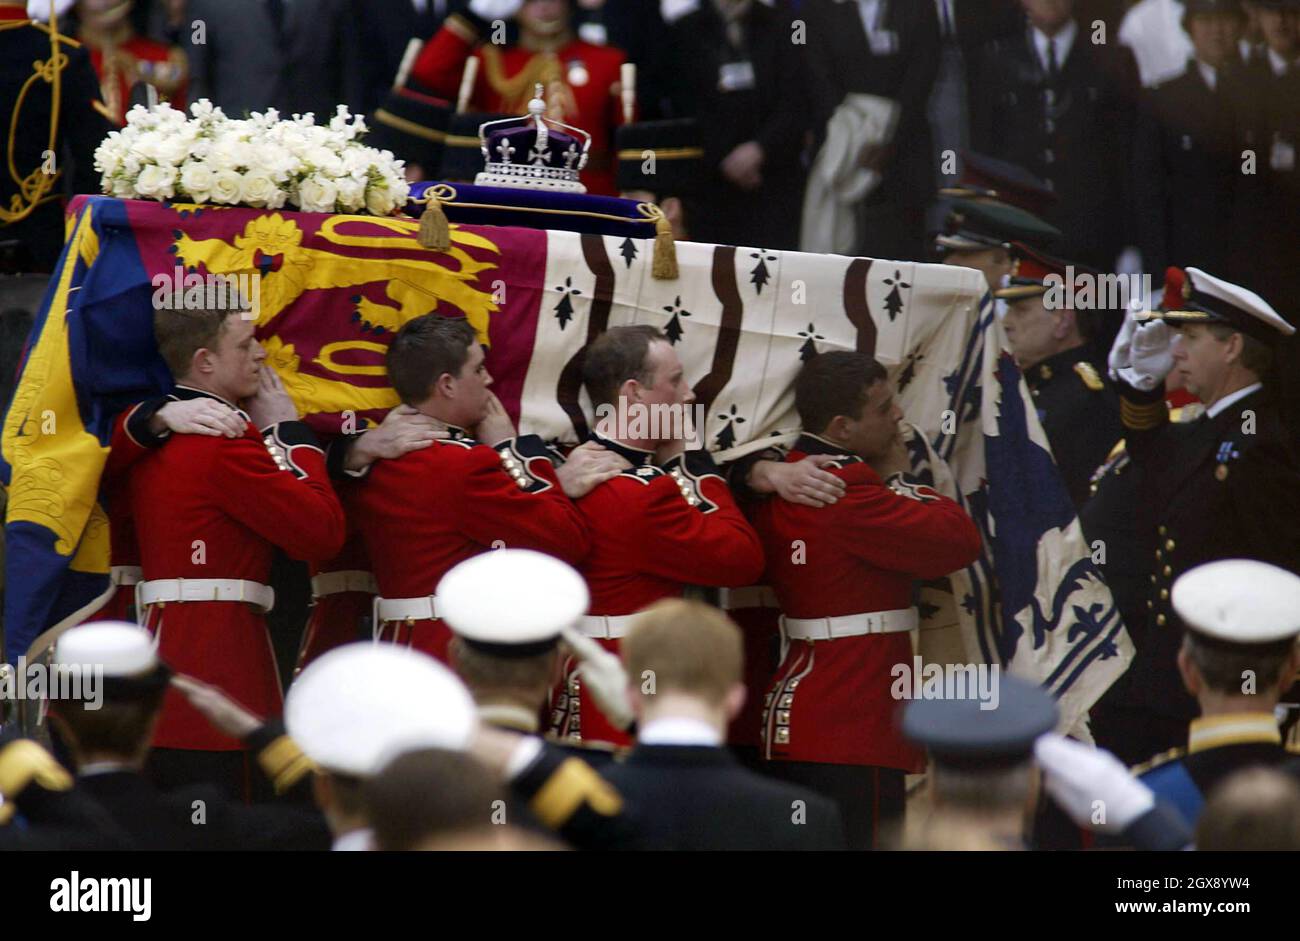 The Royal Family attending the funeral procession for the Queen Mother in Westminster, London.         Stock Photo